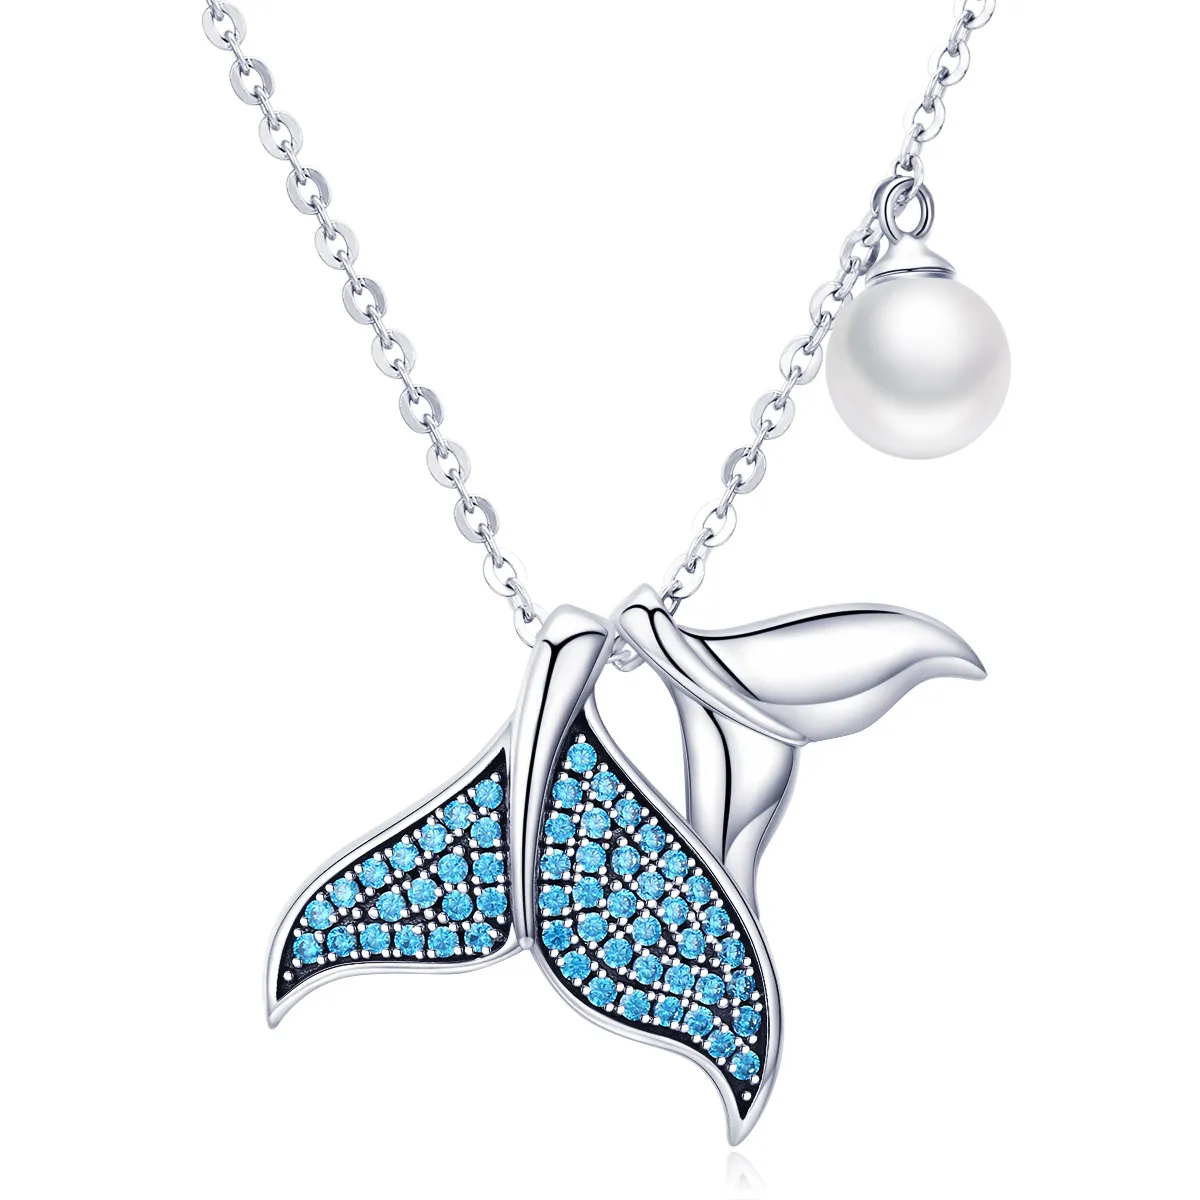 Pandora Style Silver Tears From Mermaid Necklace - SCN309